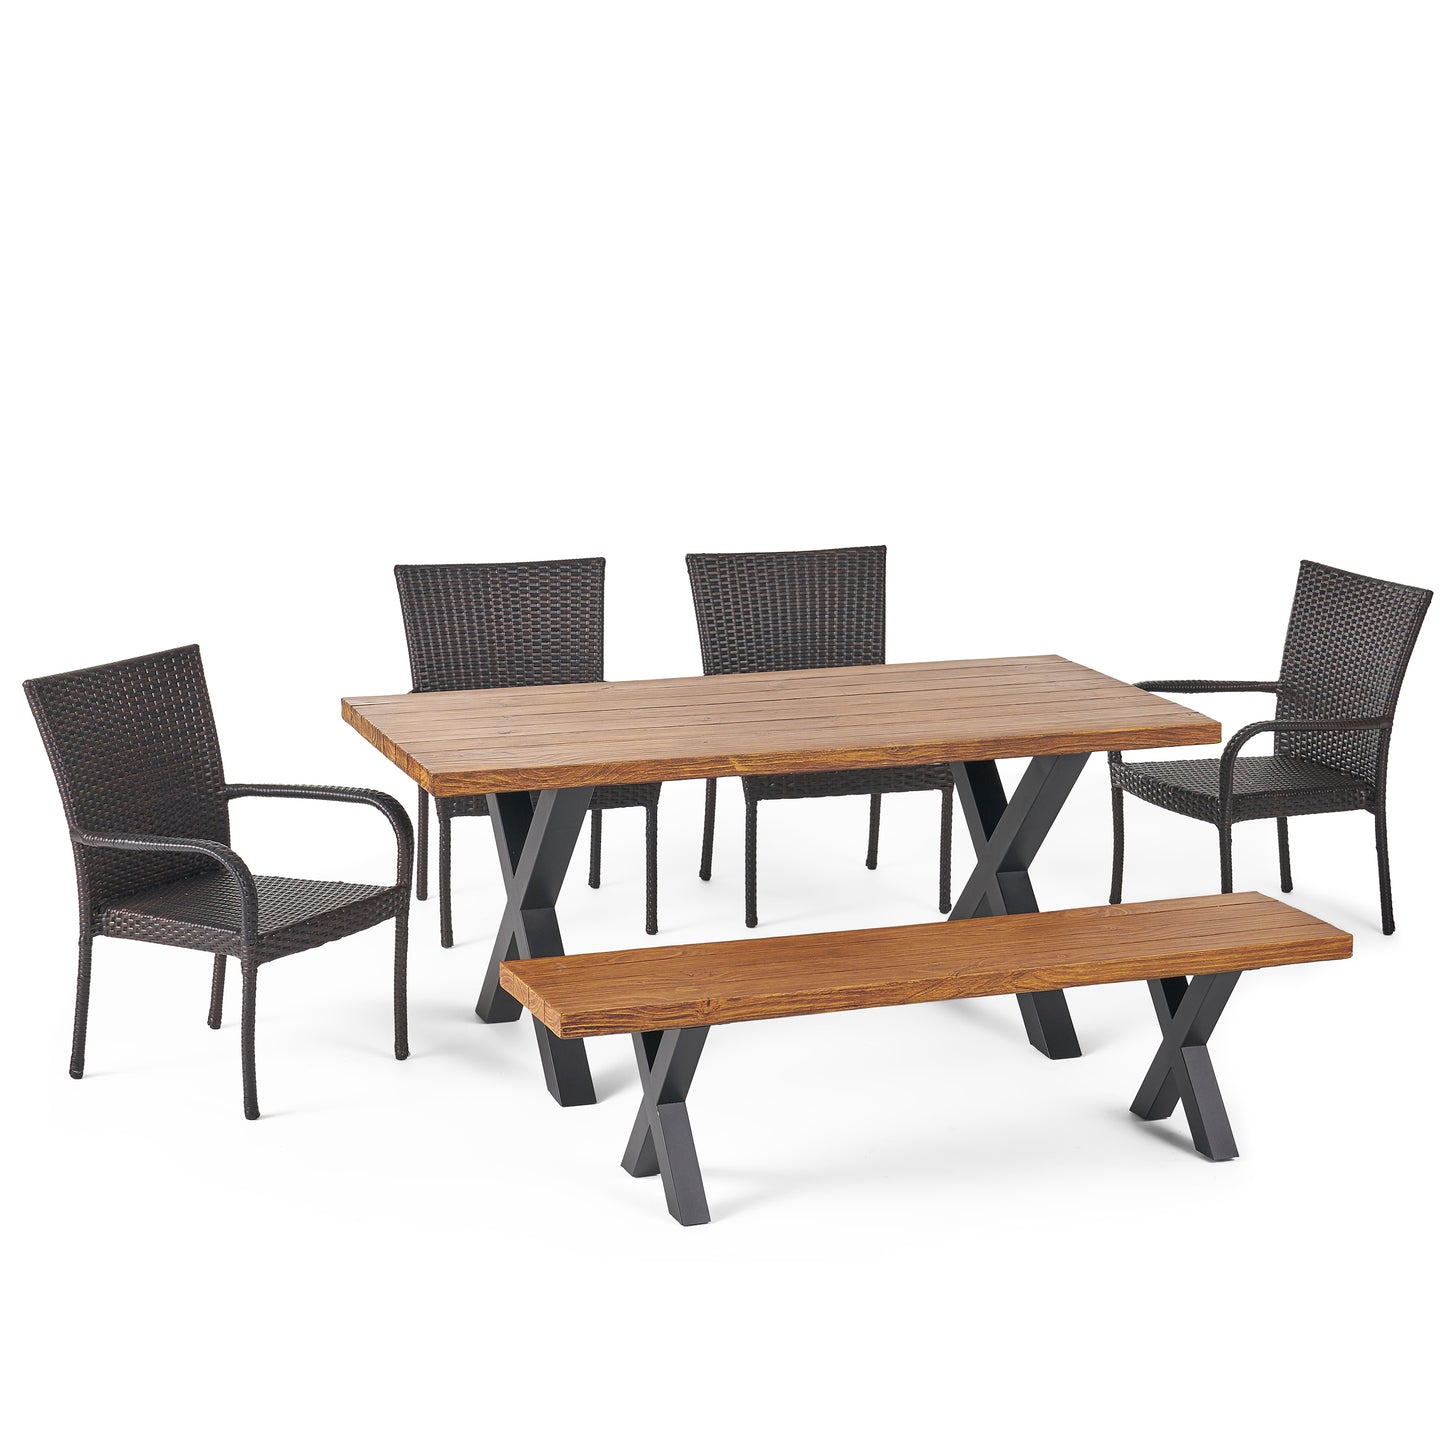 Amaryllis Outdoor 6 Piece Wicker Dining Set with Concrete Table and Bench